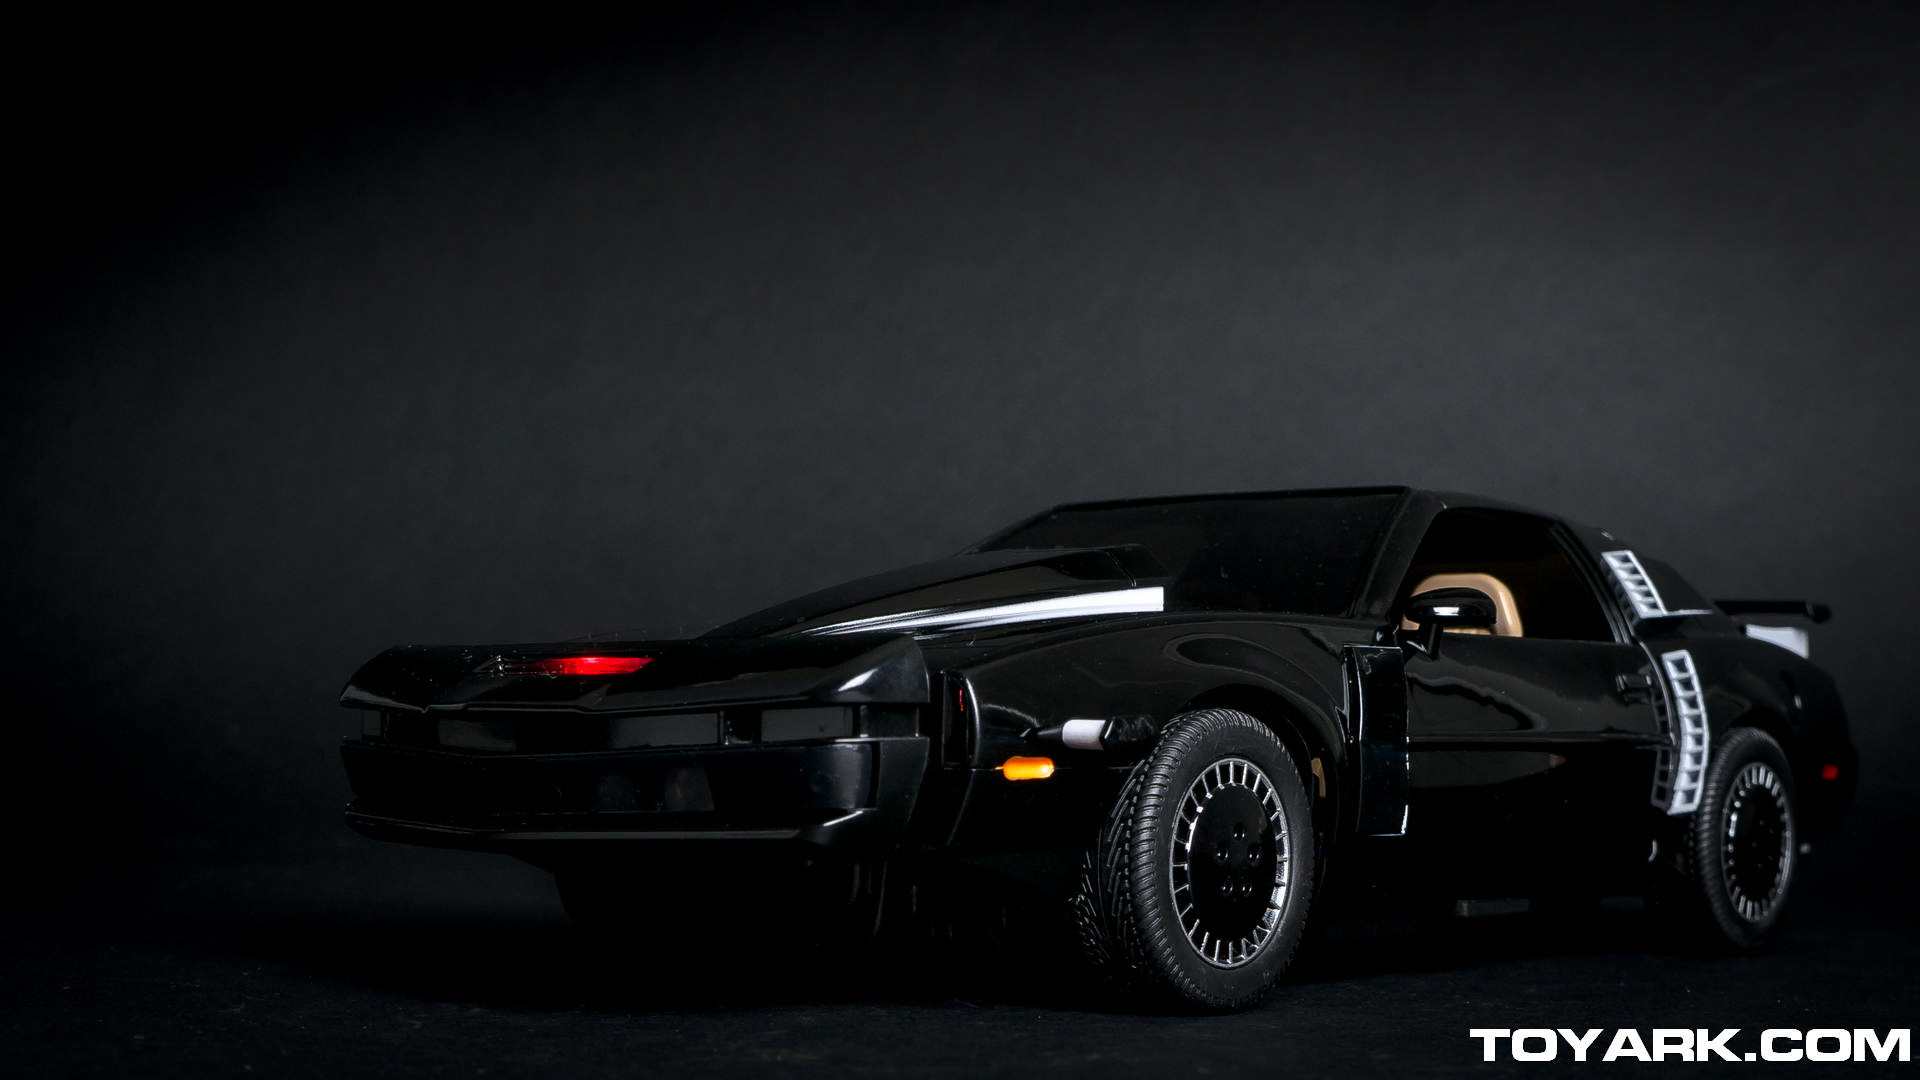 1920x1080 Knight Rider KITT LWP Android Development and Hacking